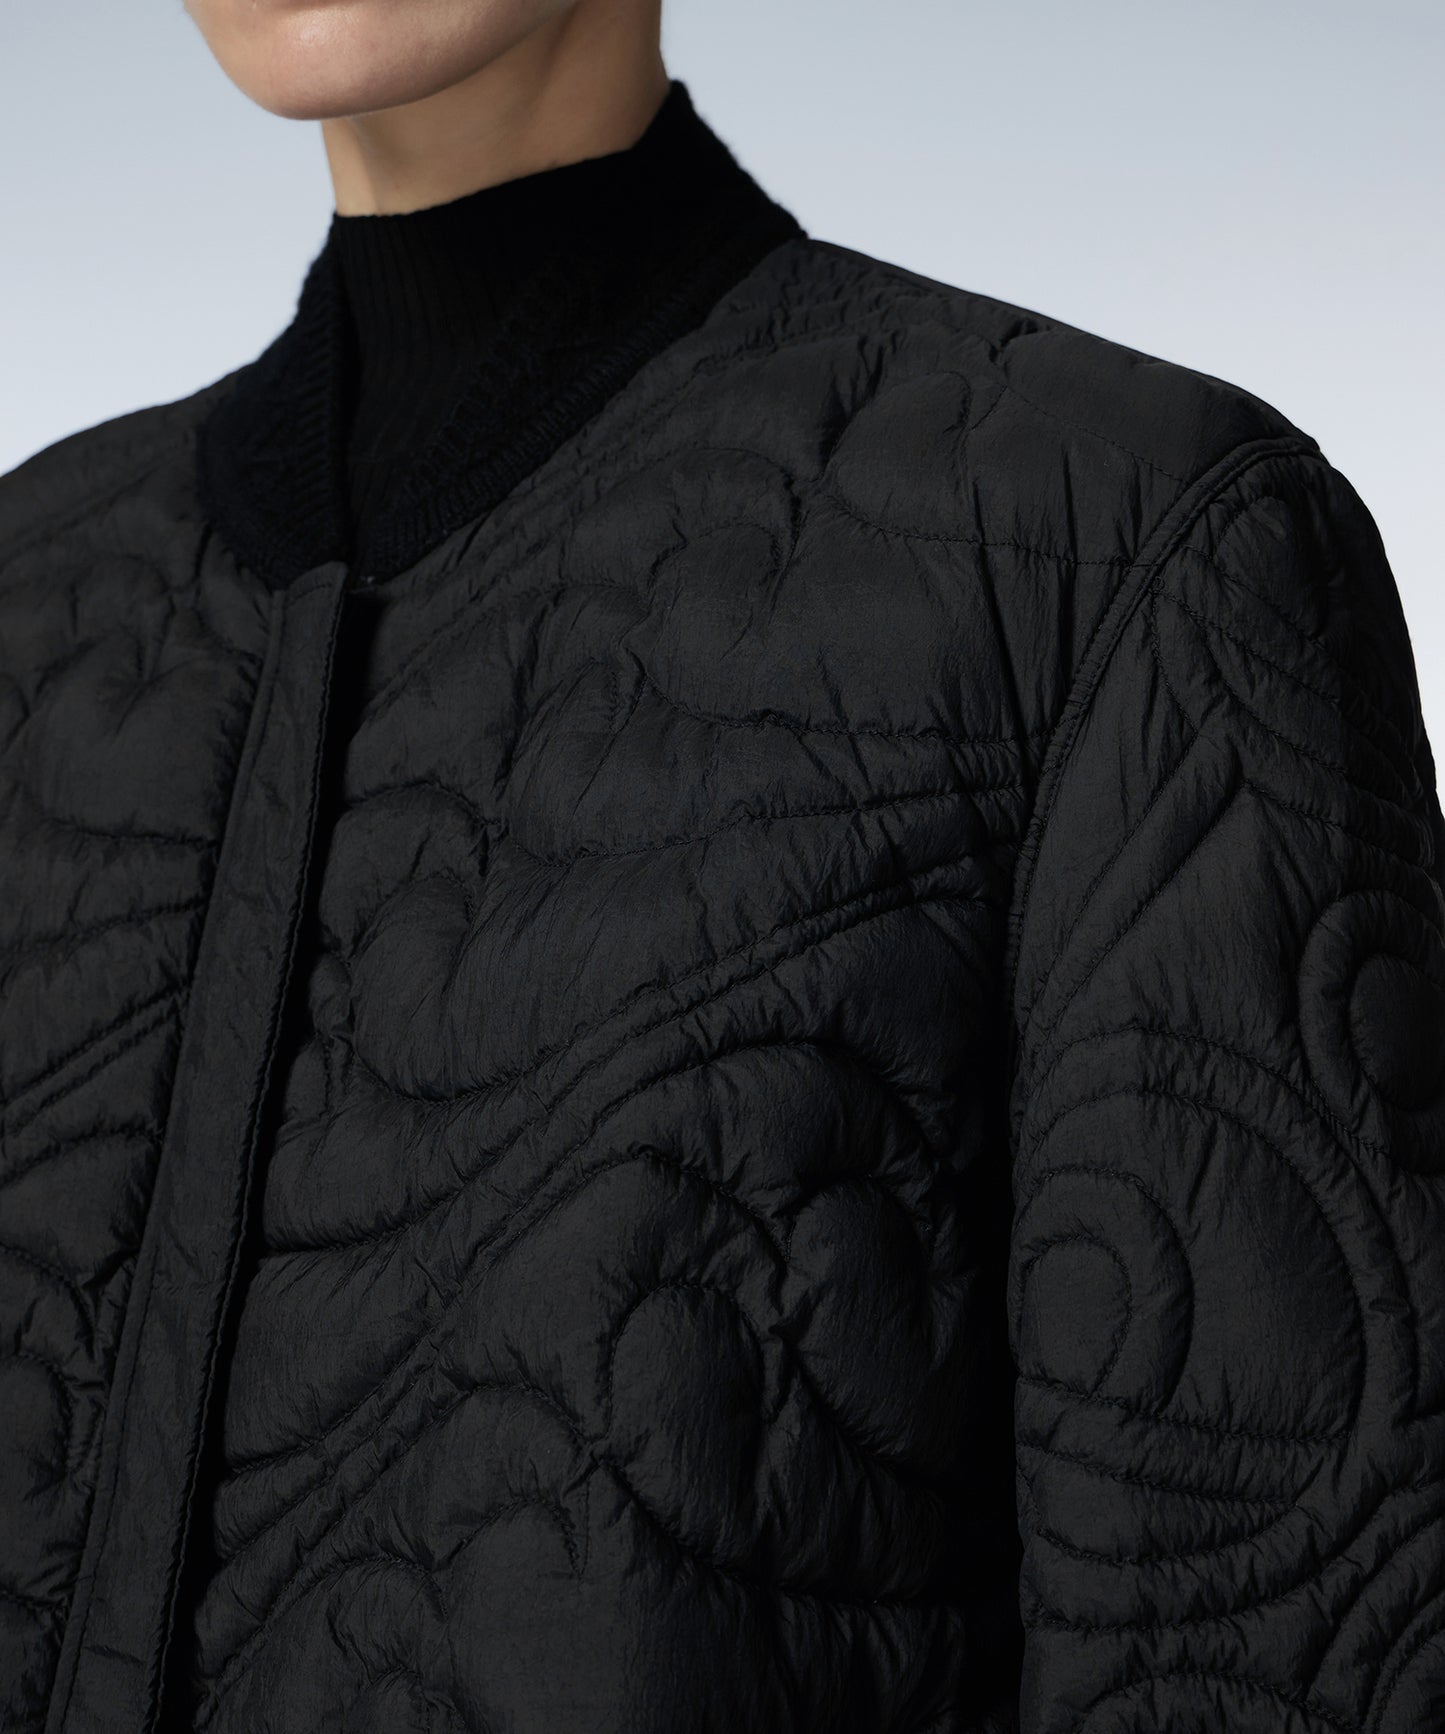 Sea Wave Drawstring Quilted Bomber Jacket